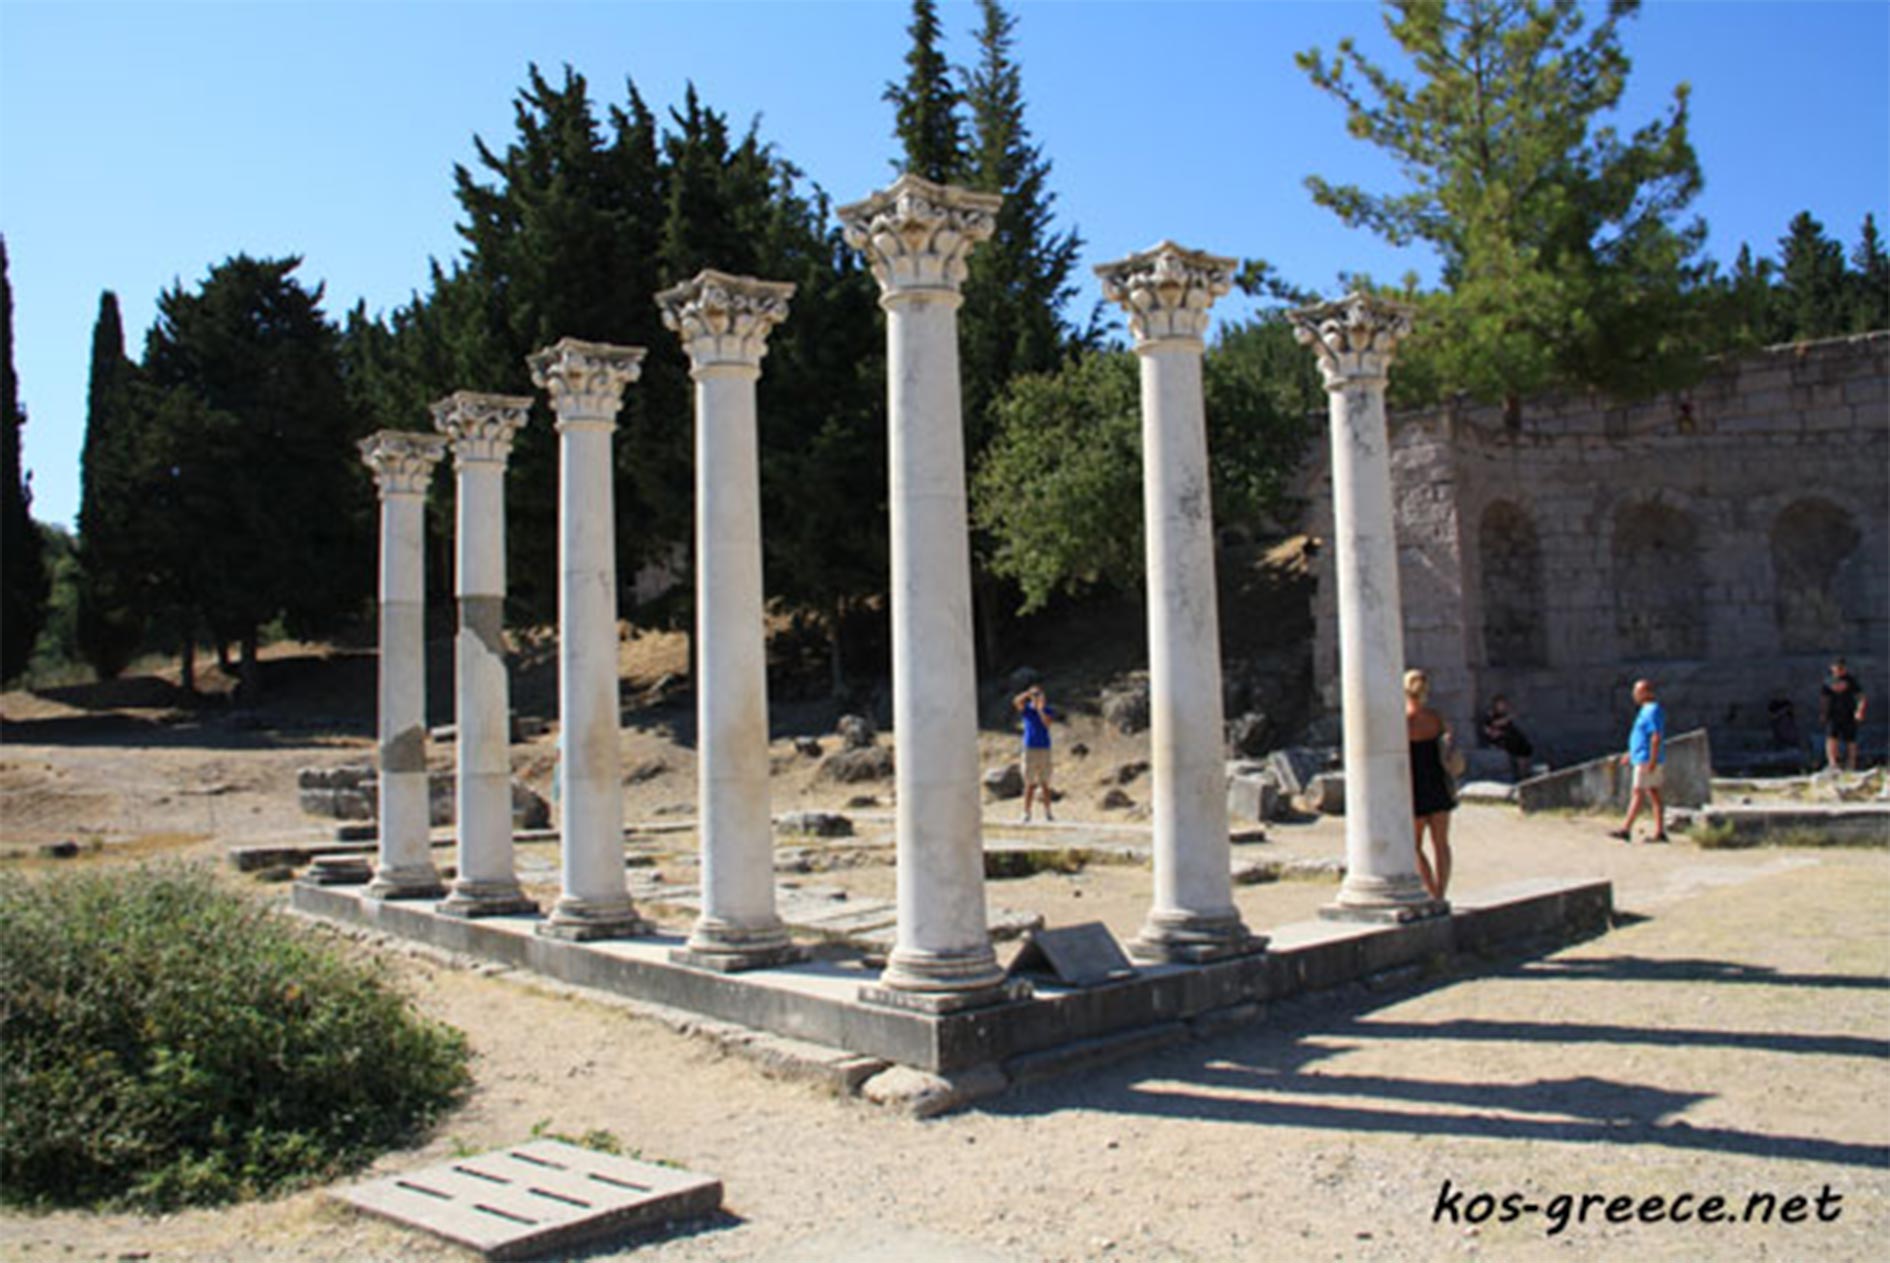 Restored columns belonging to the Temple of Apollo on the second level